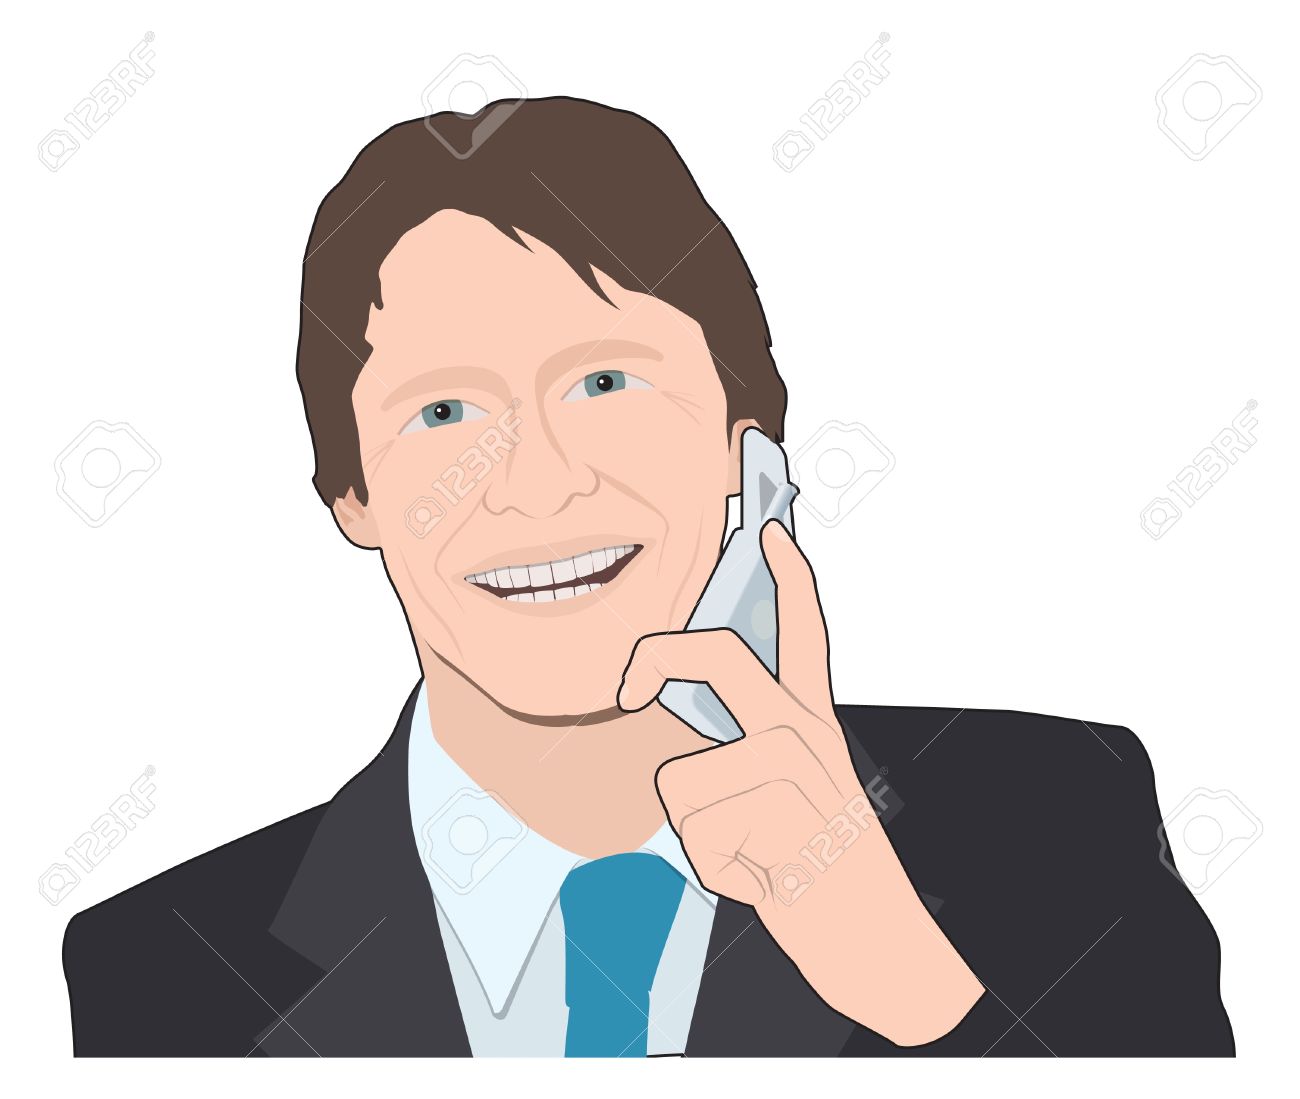 Business Man On Mobile Phone Royalty Free Cliparts, Vectors, And.